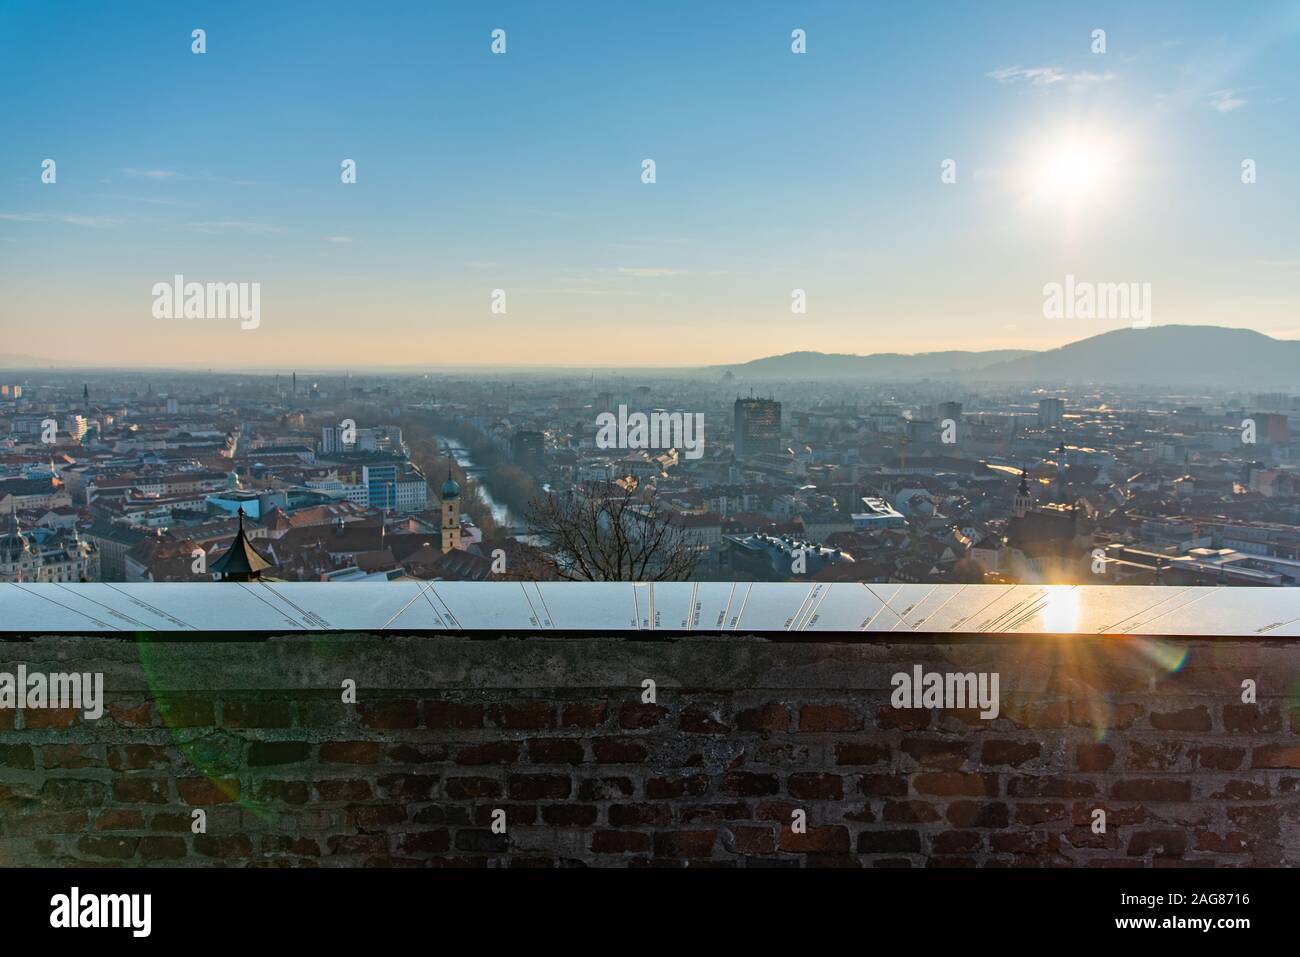 Schlossberg Castle mountain in Graz. Map wall with directions of cities all over the world. Stock Photo